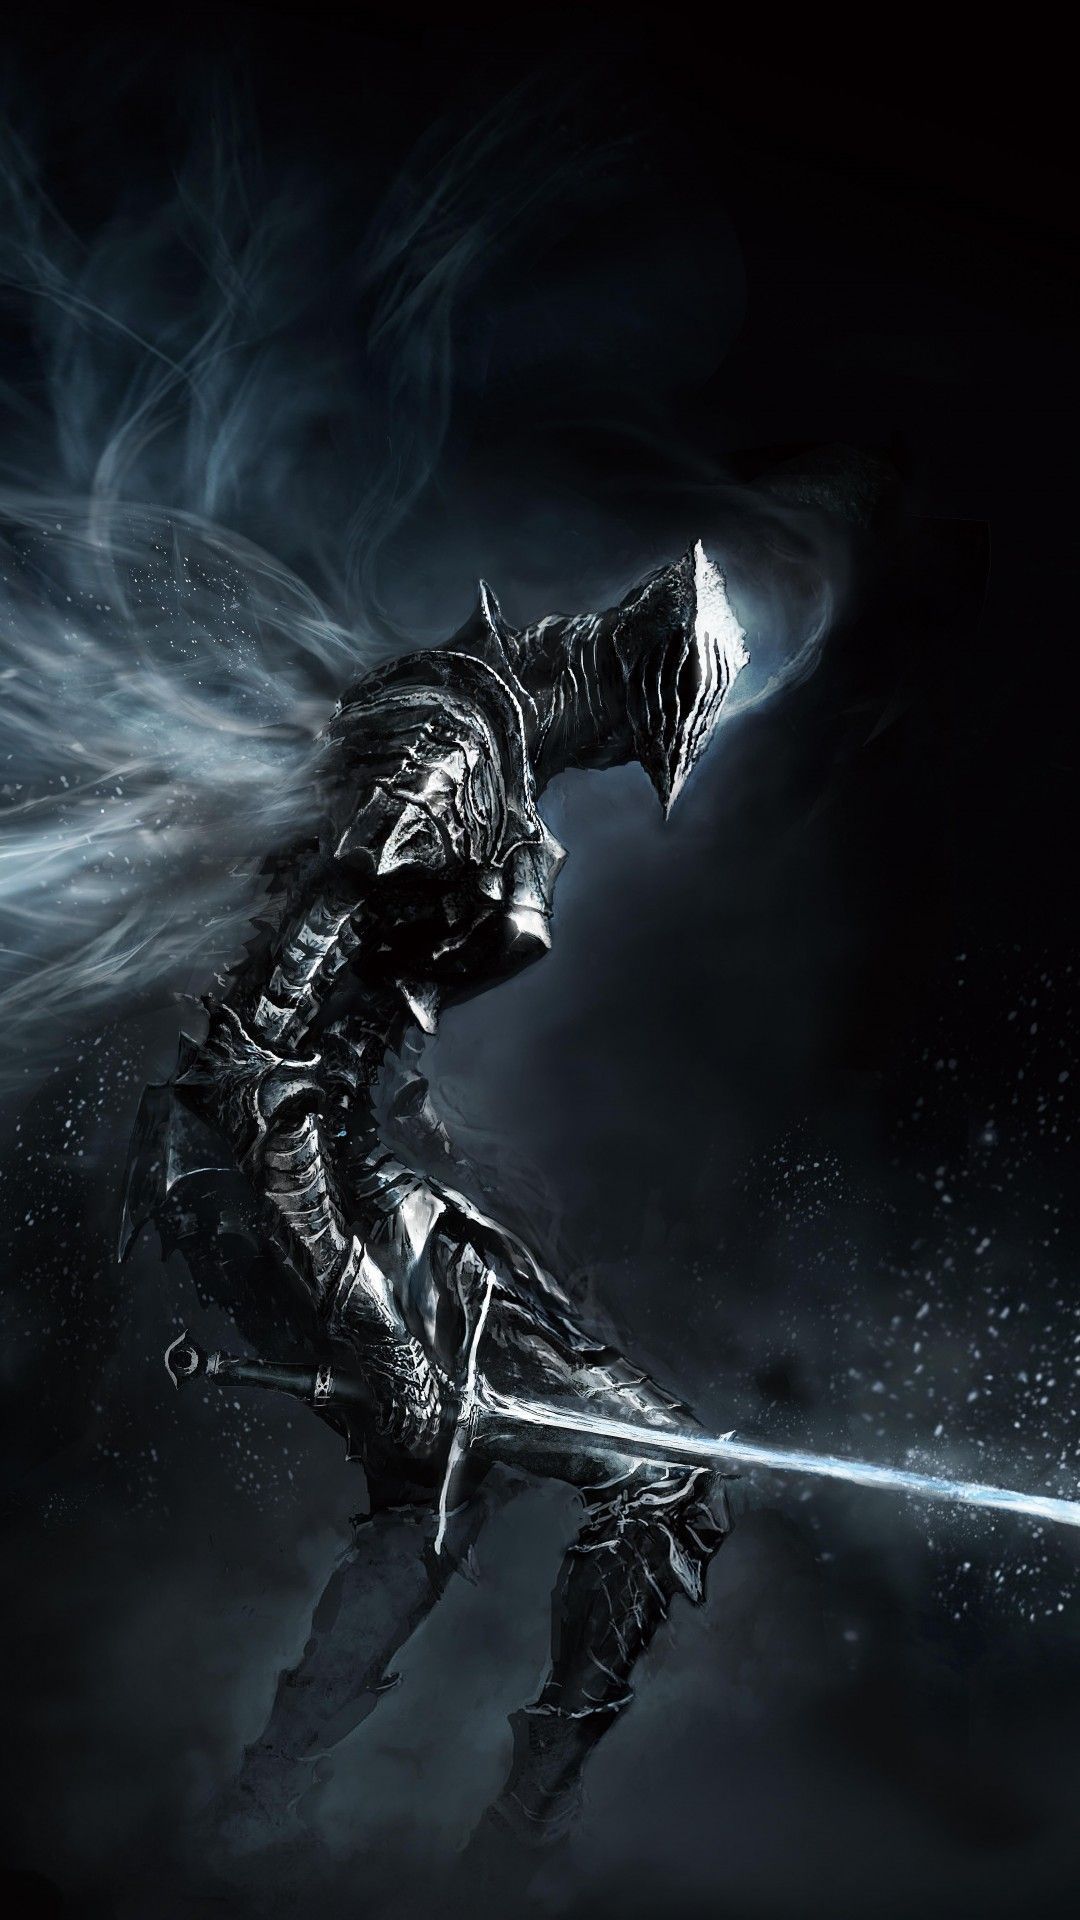 Dark Souls Wallpaper Android On Home Screen on kecbio.com. #iphone #android #wallpaper #Dark #Souls. Dark souls wallpaper, Dark souls, Dark souls art